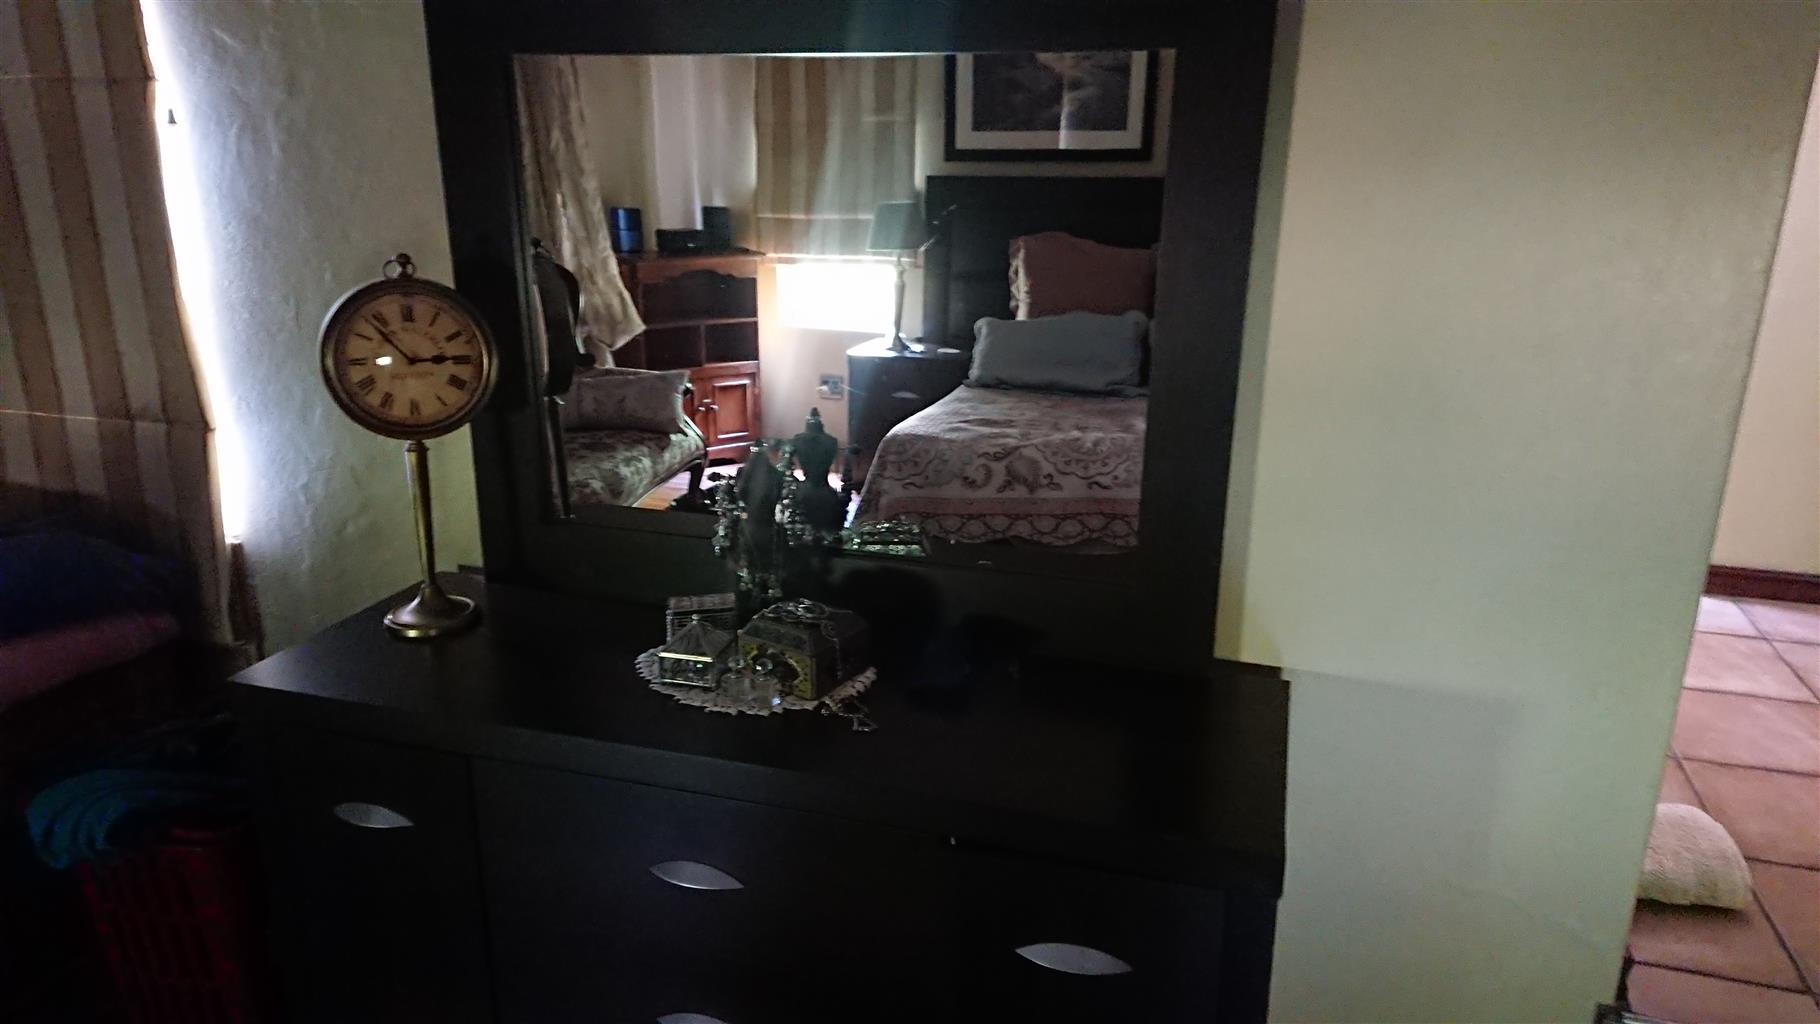 Bedroom suites, lounge set and pool table for sale together or seperatly